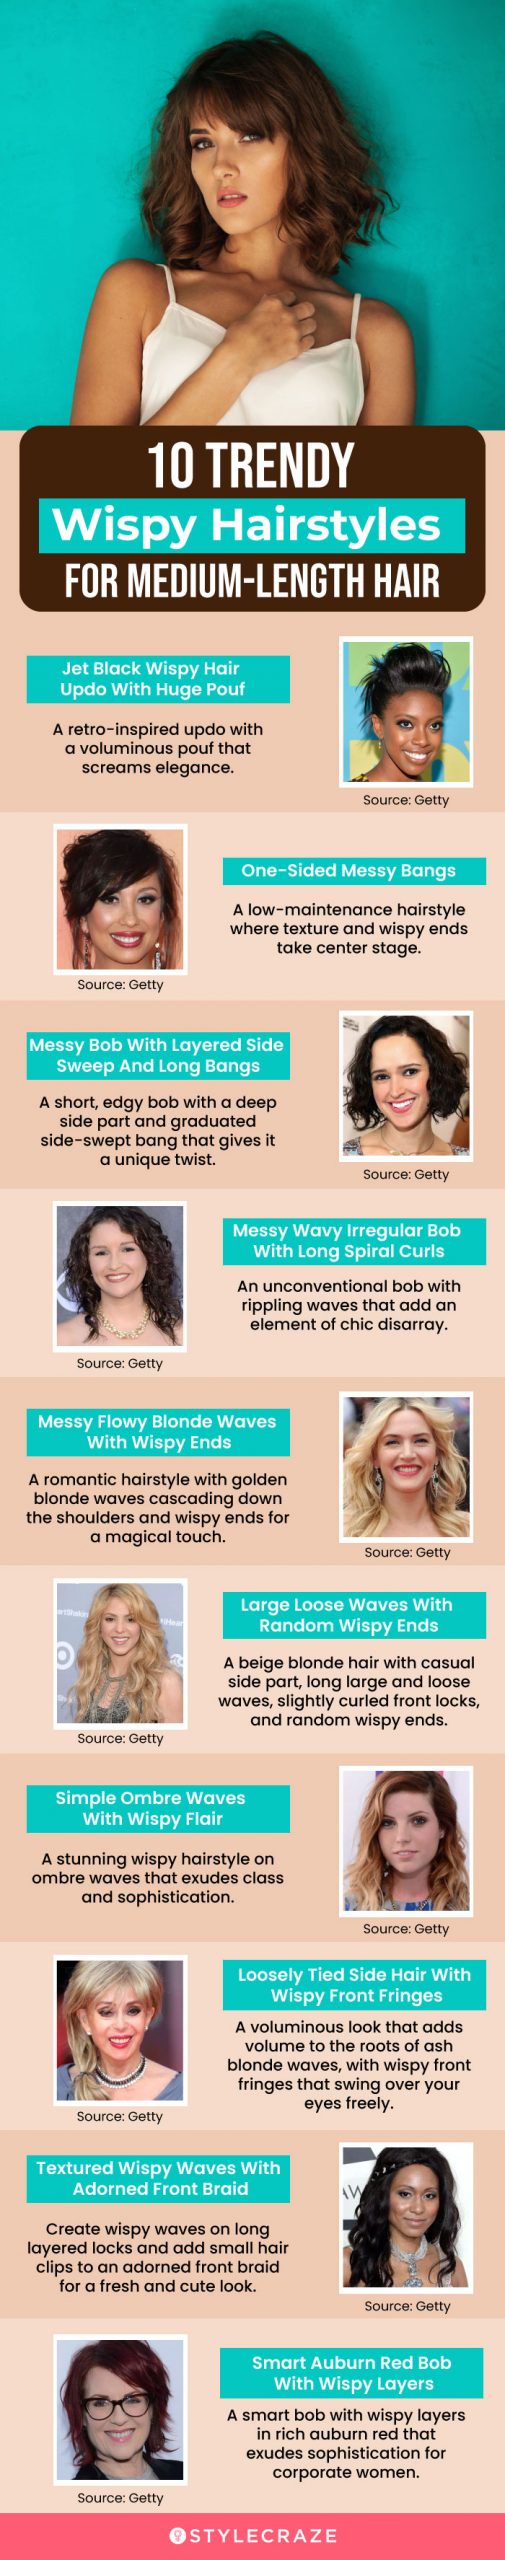 10 trendy wispy hairstyles for medium length hair (infographic)